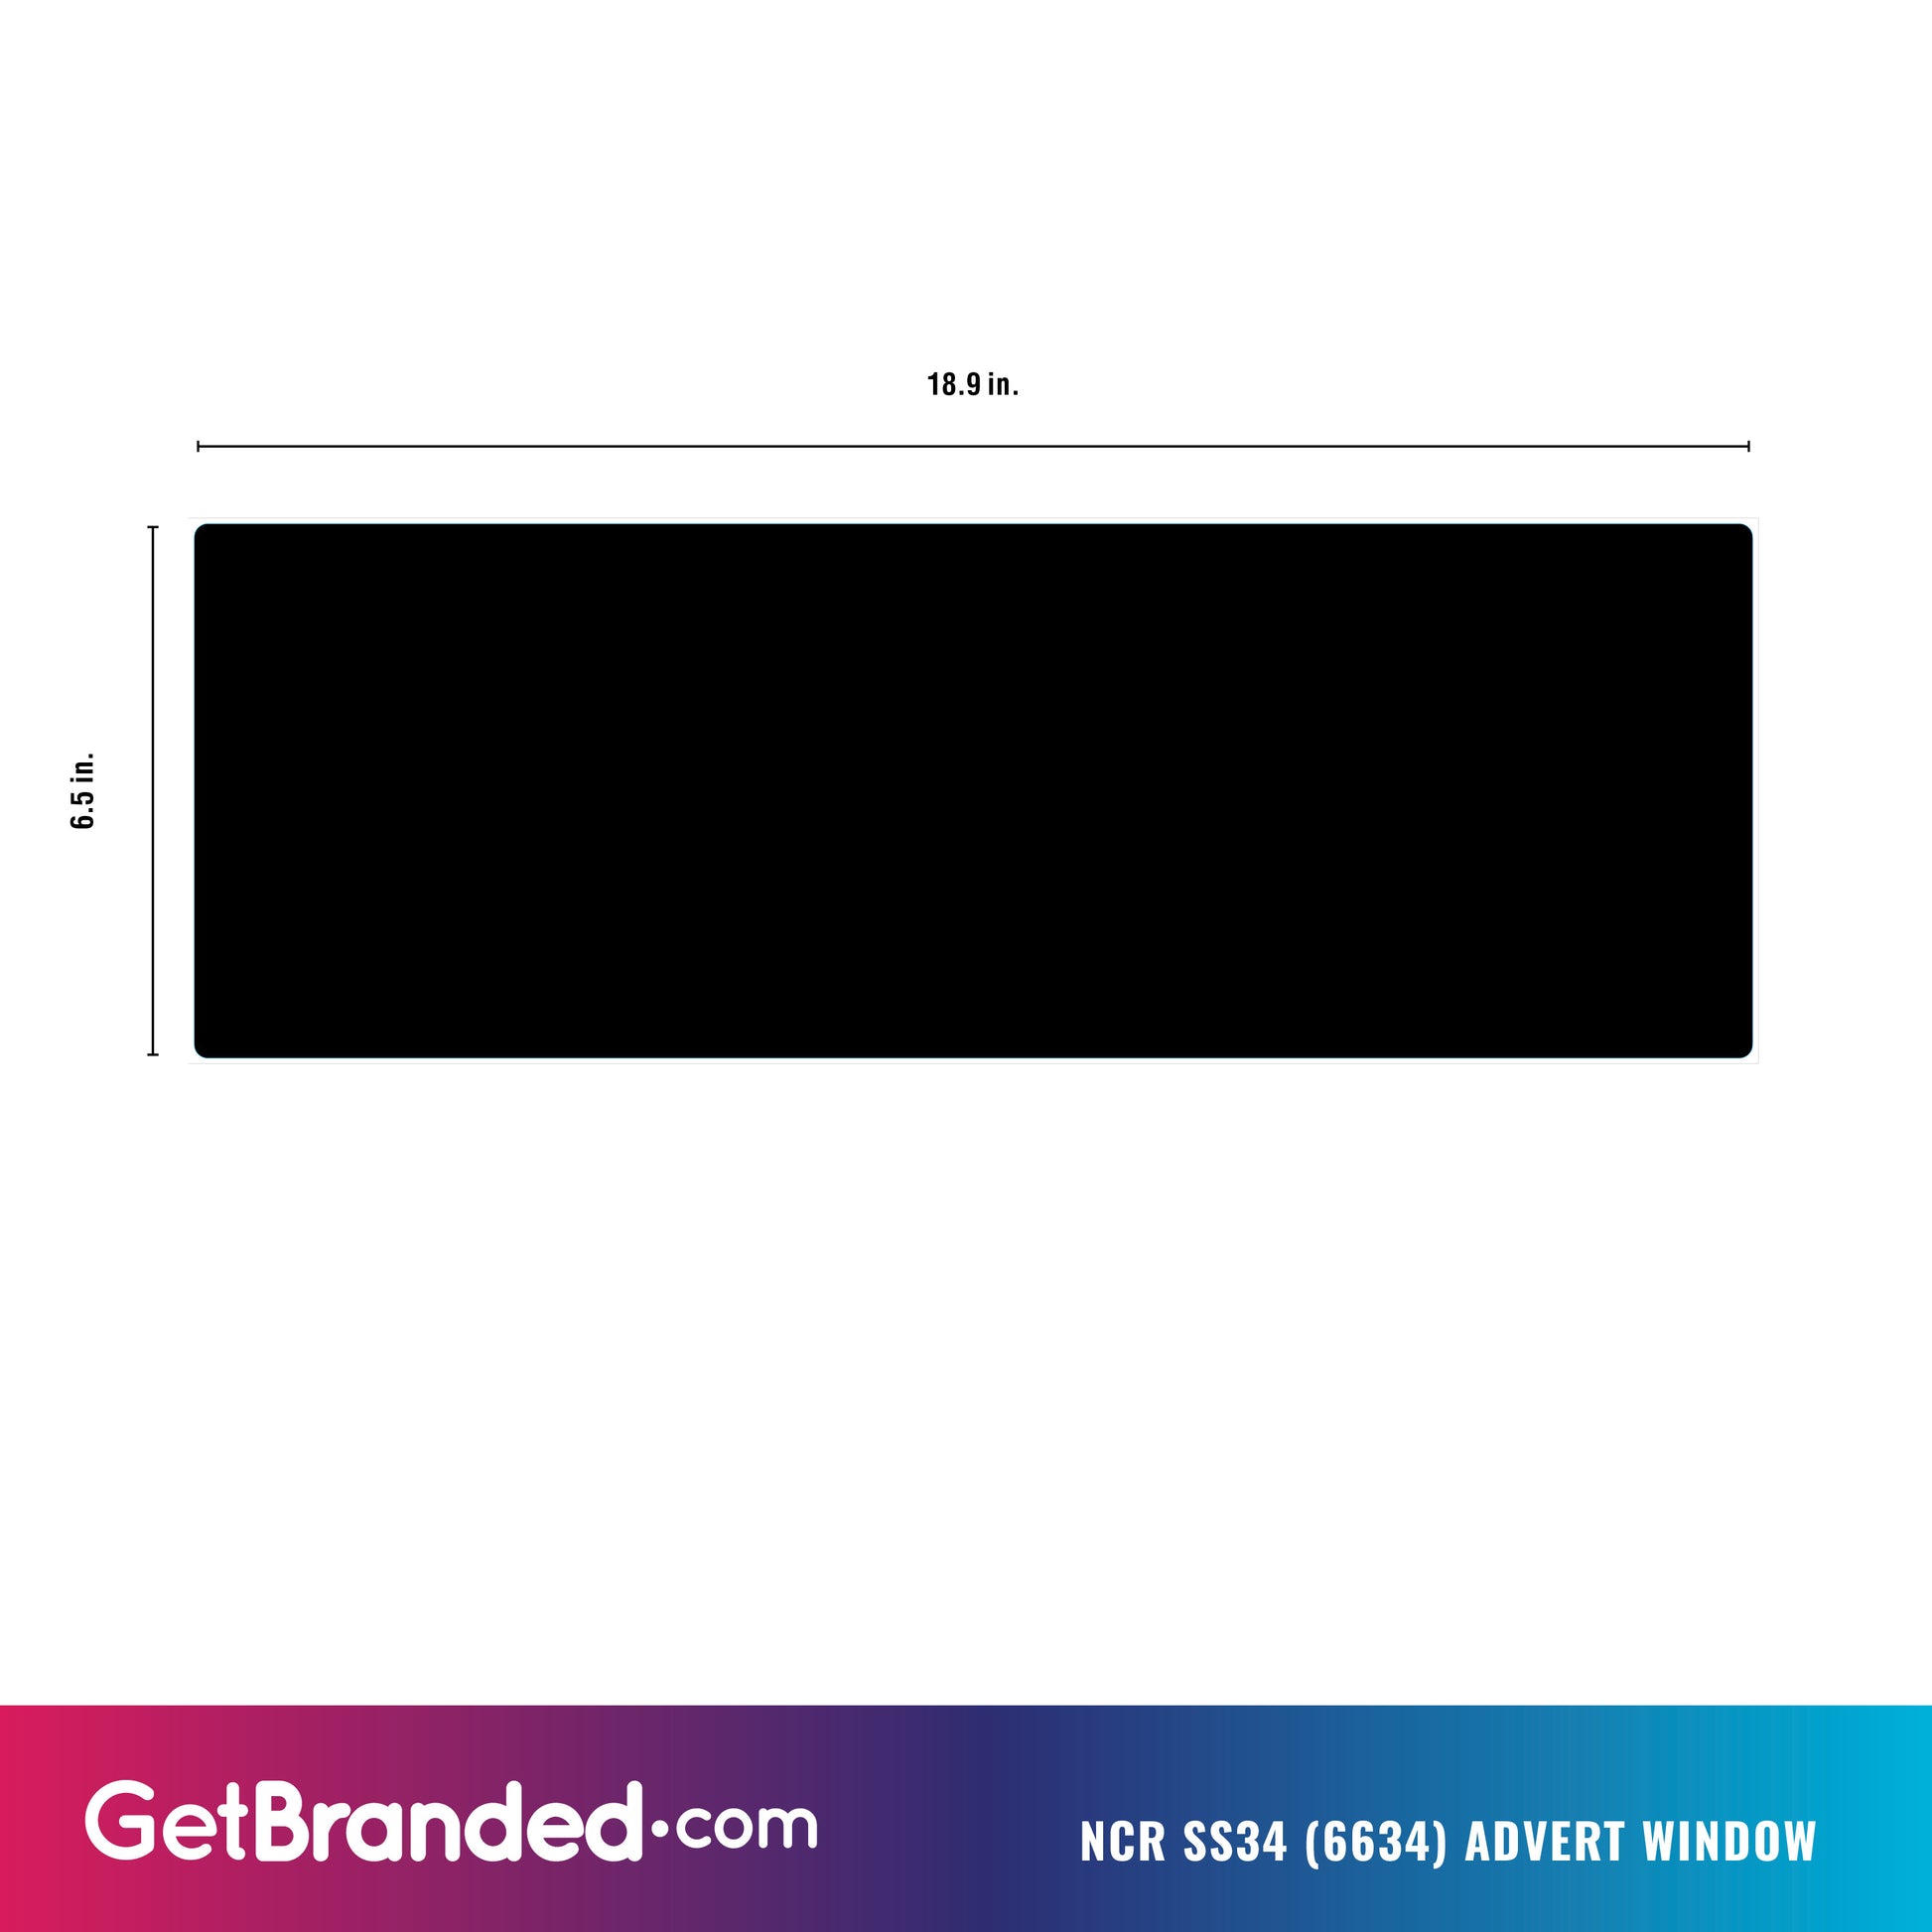 NCR SS34 (6634) ATM Advertising Window Template.